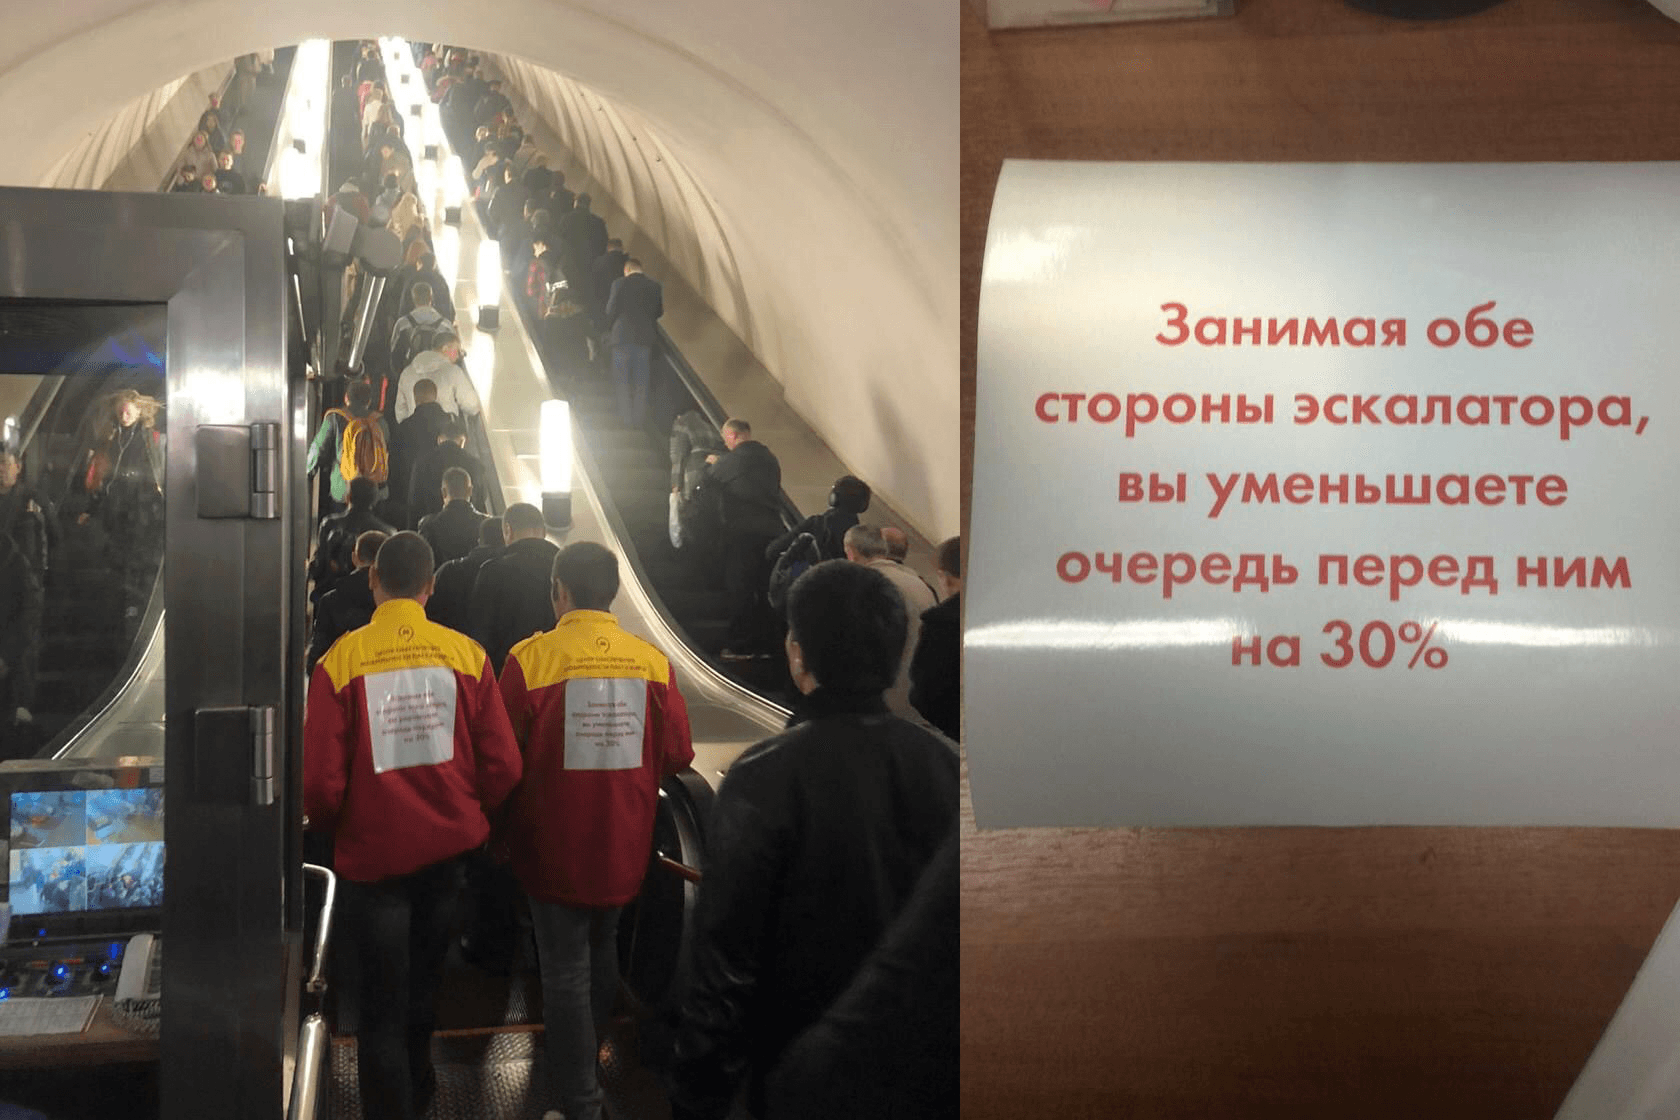 Moscow metro asked to occupy both sides of the escalator - Metro, Moscow, Queue, Escalator